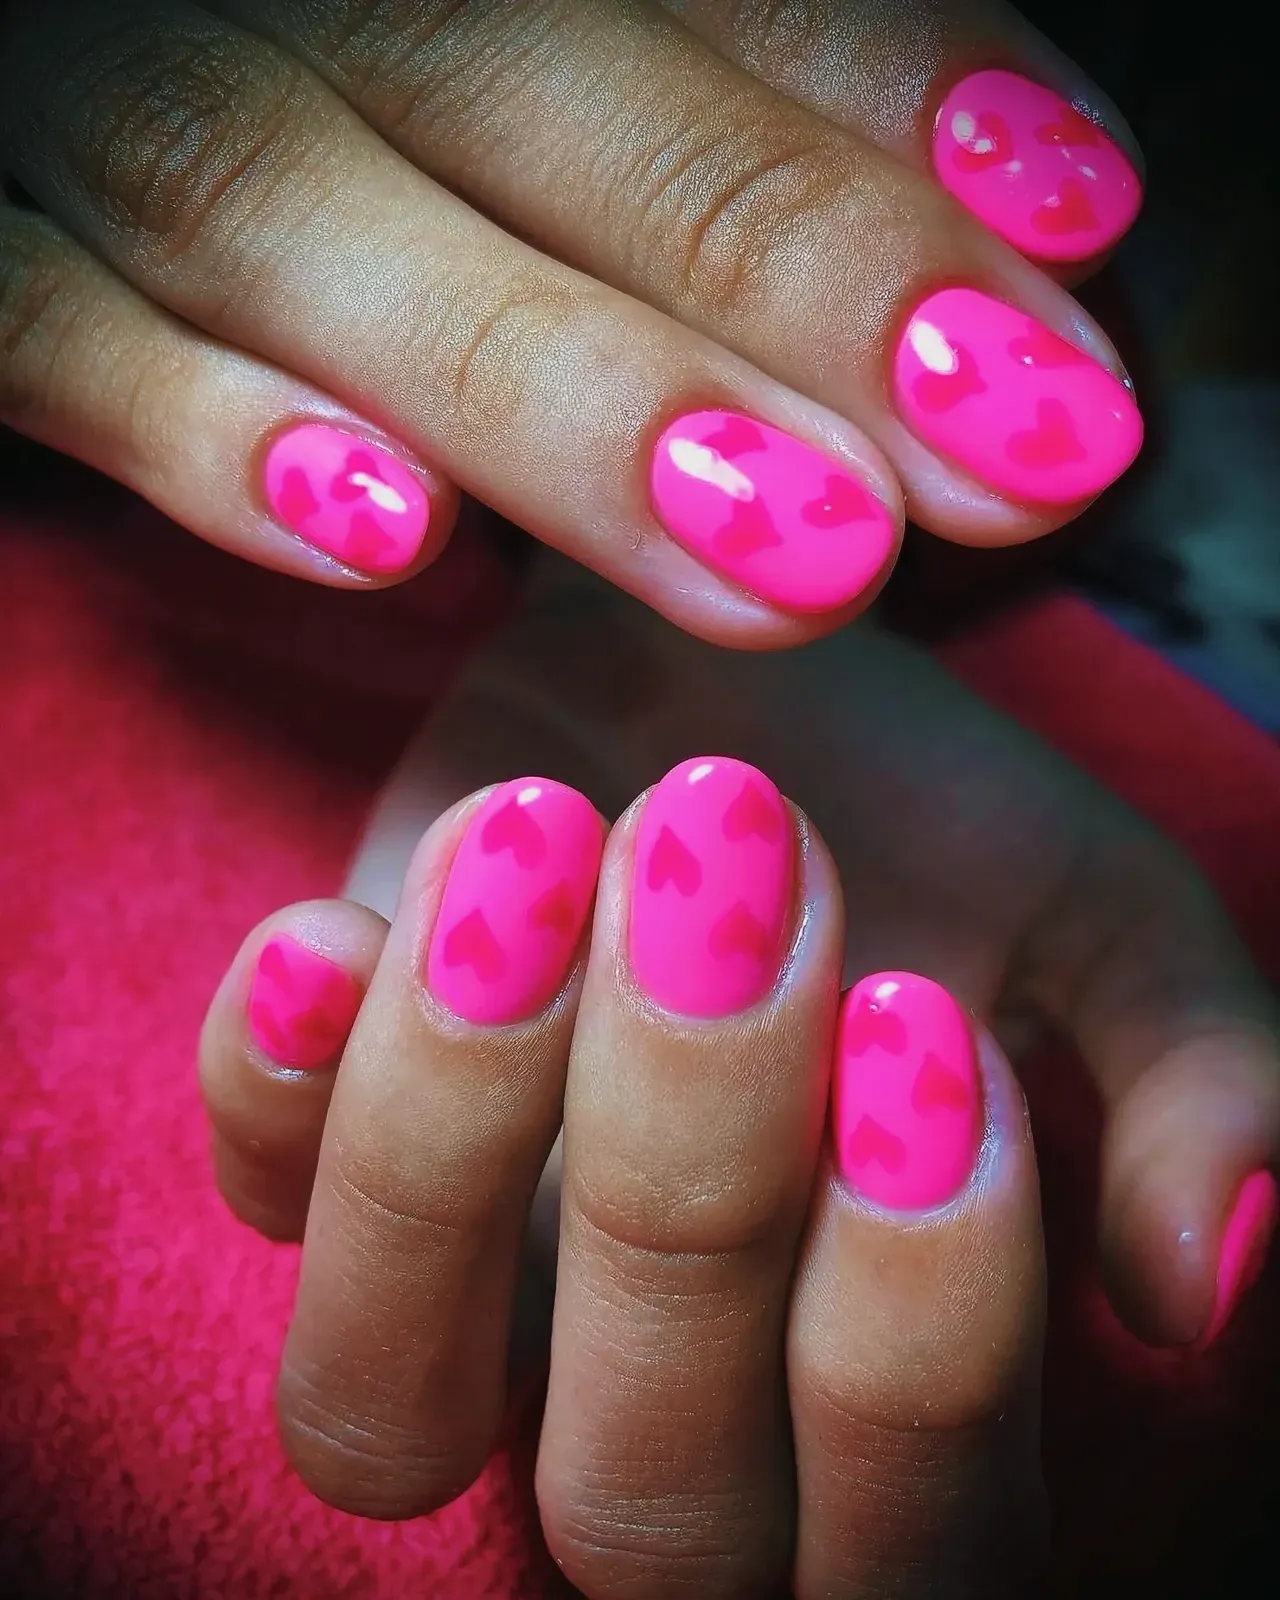 Close-up view of beautifully manicured pink nails